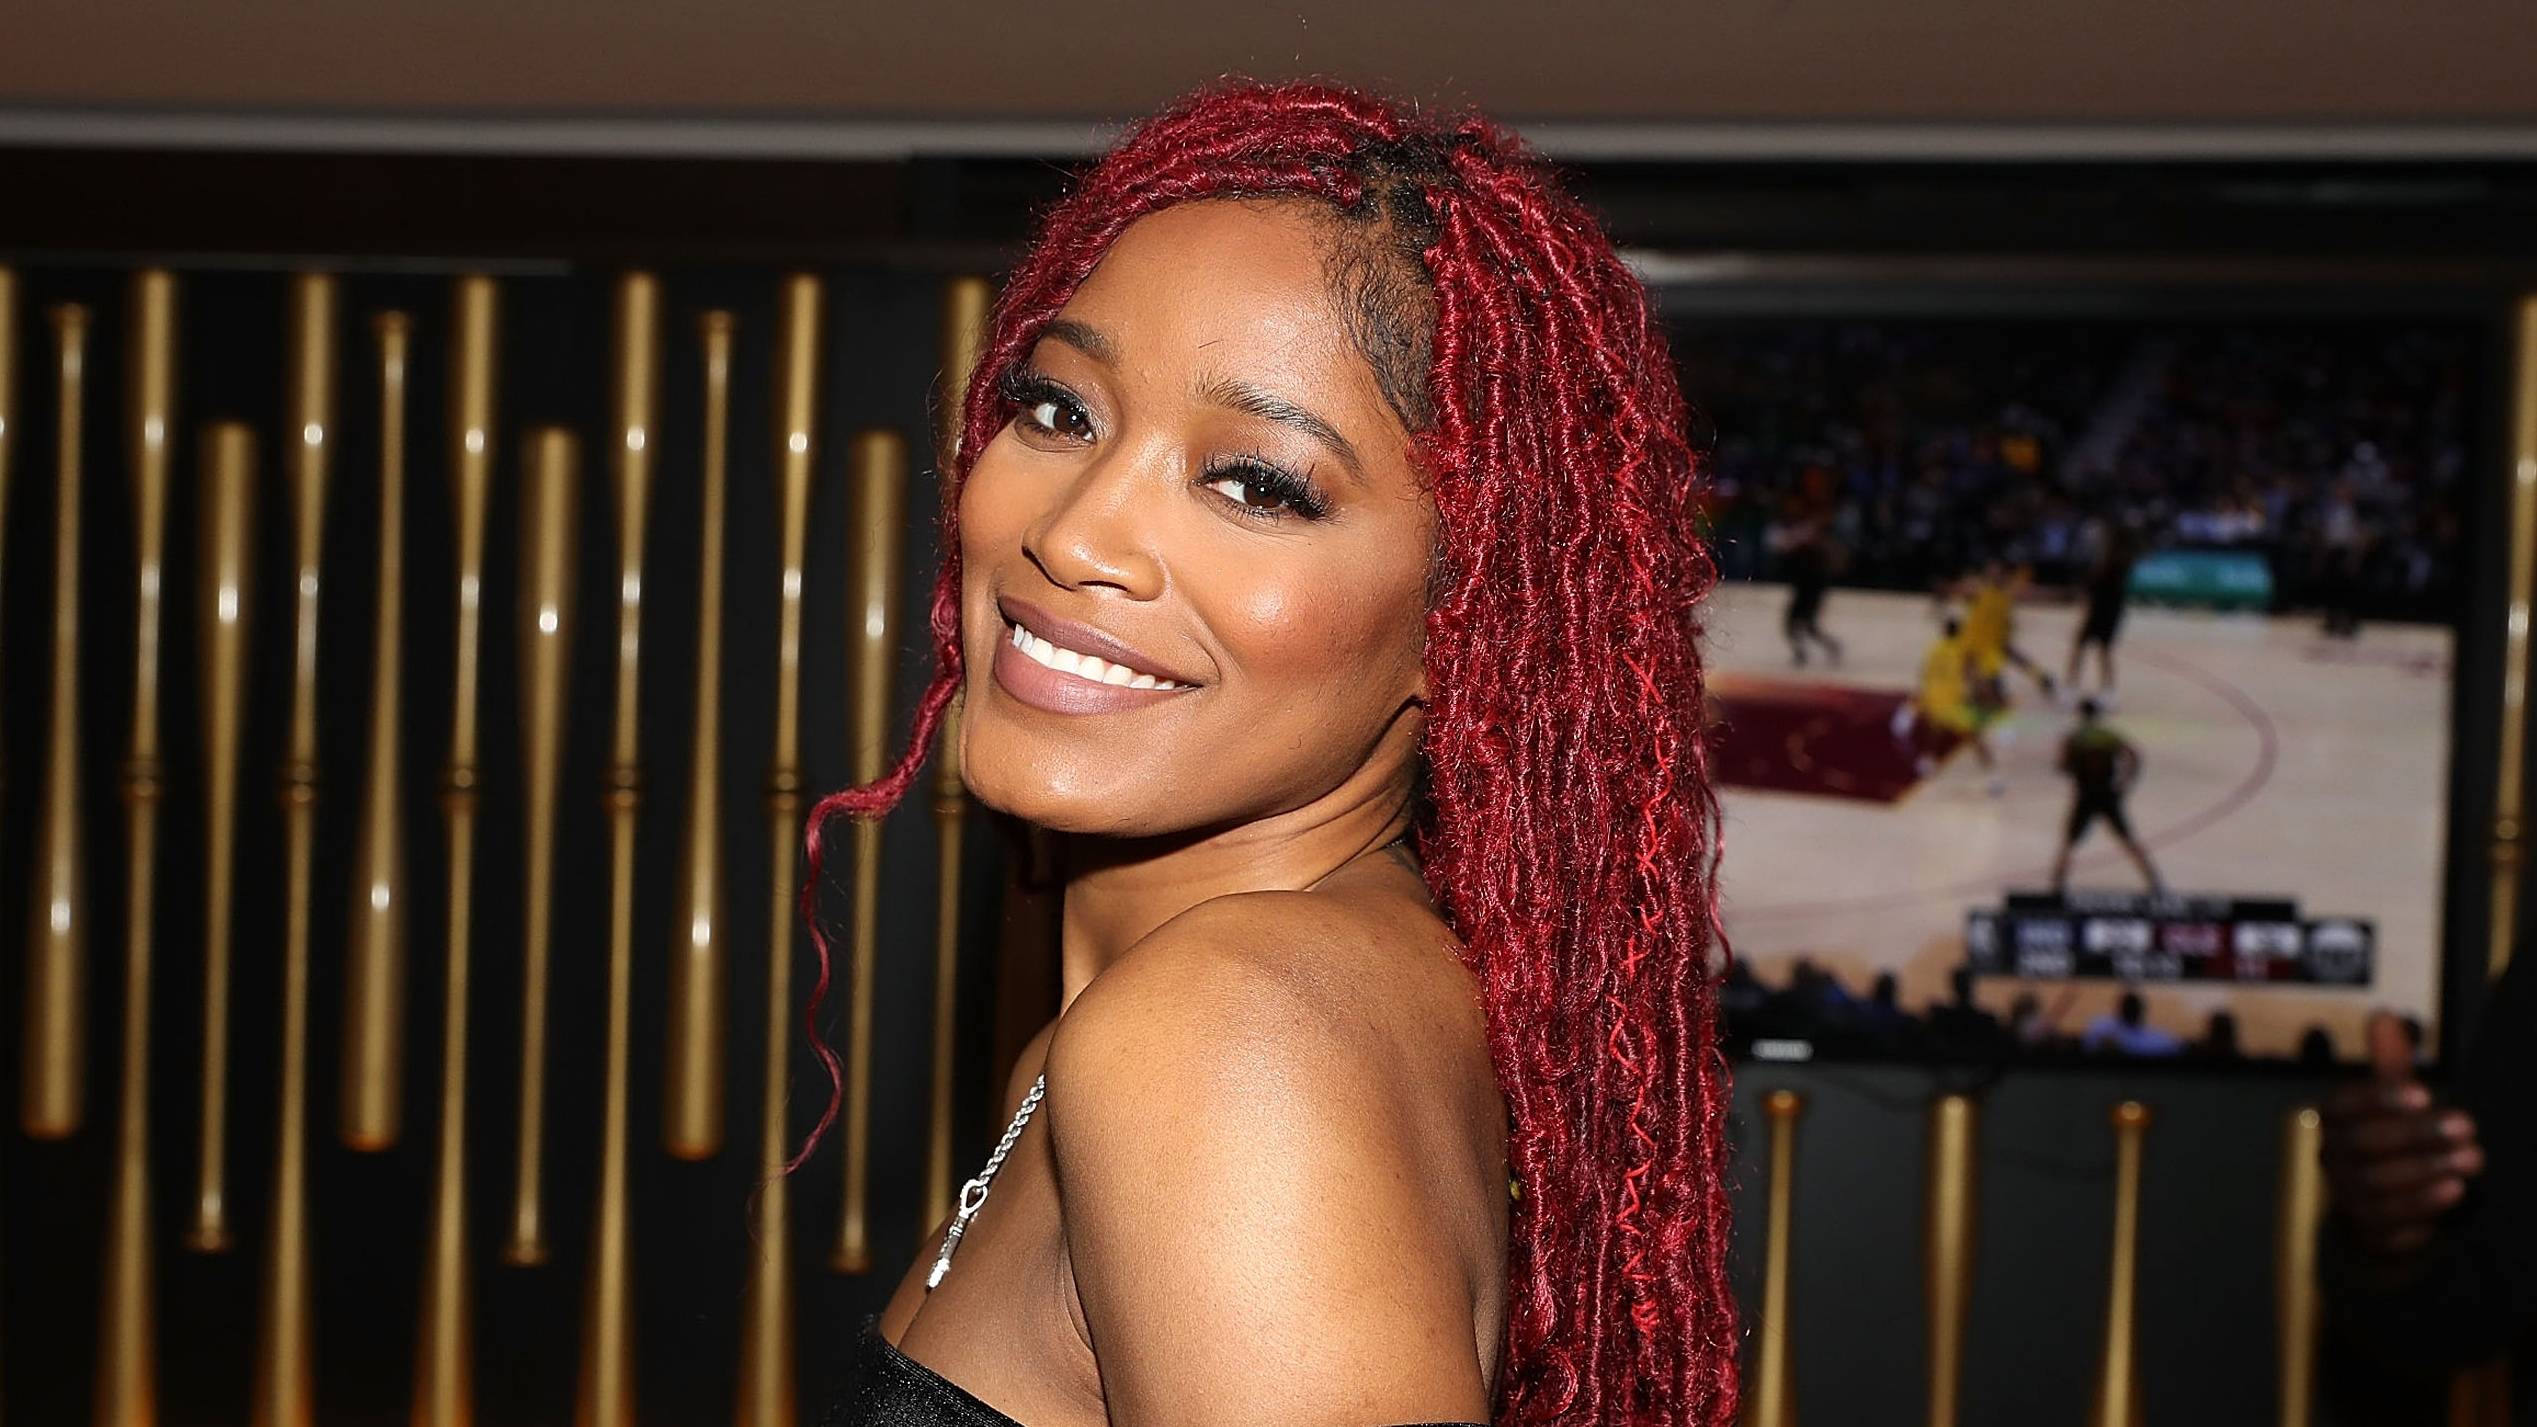 Keke Palmer attends her listening party at 40 / 40 Club on April 18, 2018 in New York City.